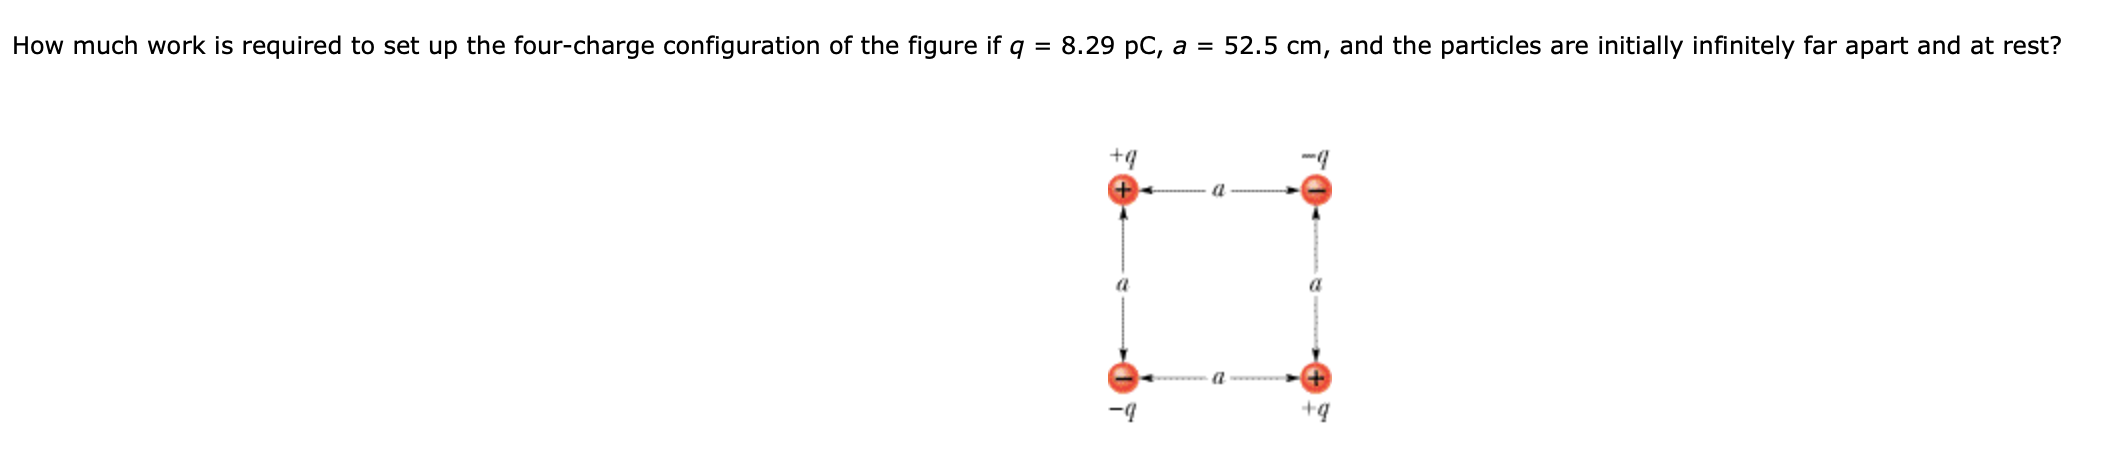 How much work is required to set up the four-charge configuration of the figure if q
8.29 pC, a = 52.5 cm, and the particles are initially infinitely far apart and at rest?
+4
-4
+q
